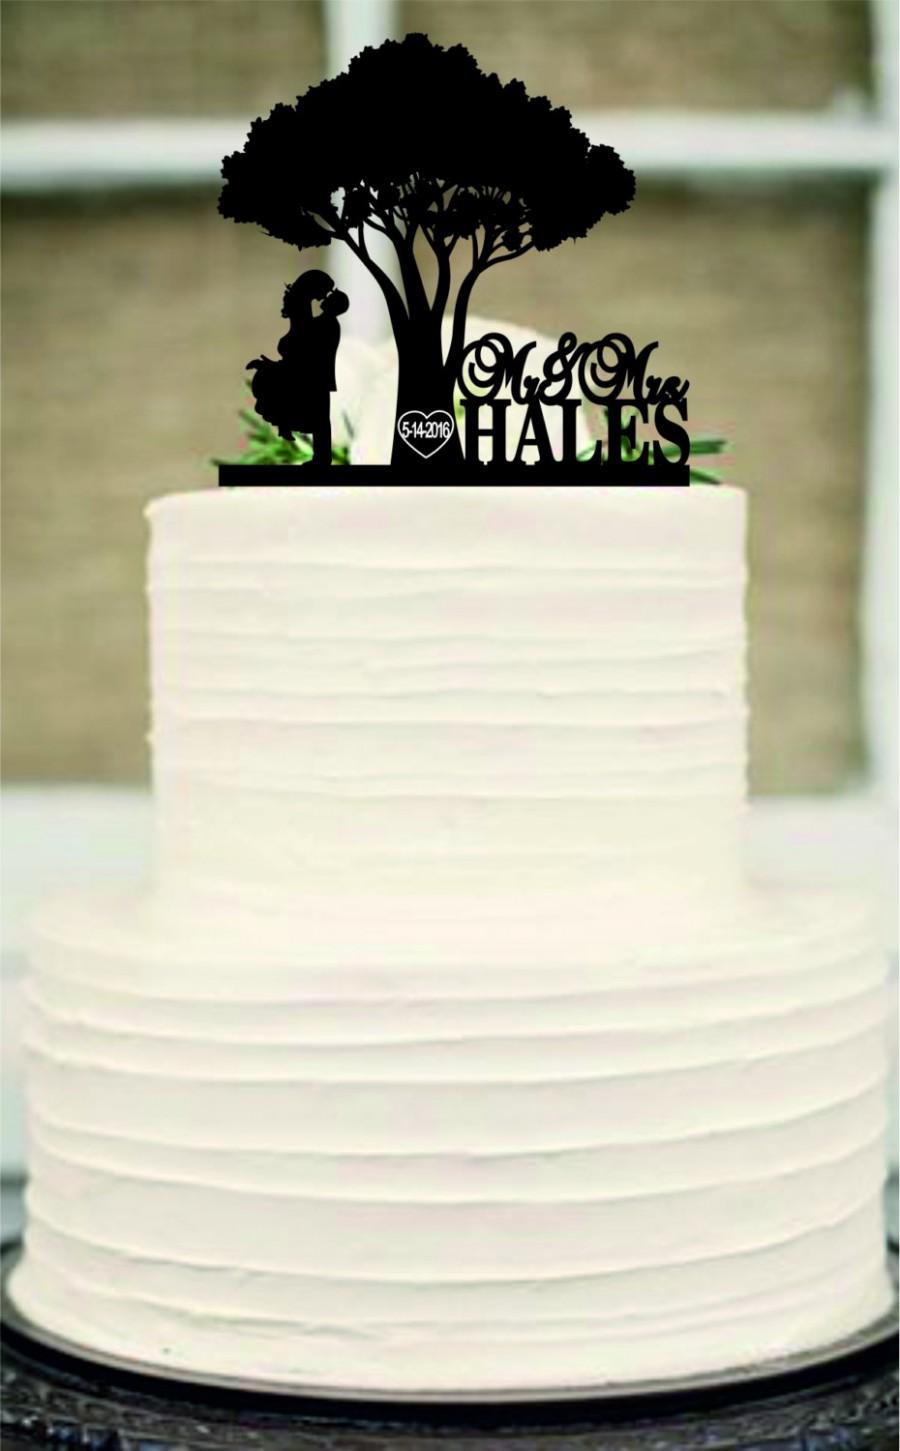 Hochzeit - Rustic Wedding Cake Topper-Custom Wedding Cake Topper-Personalized Monogram Cake Topper-Mr and Mrs Cake Topper-Bride and Groom a cat or dog